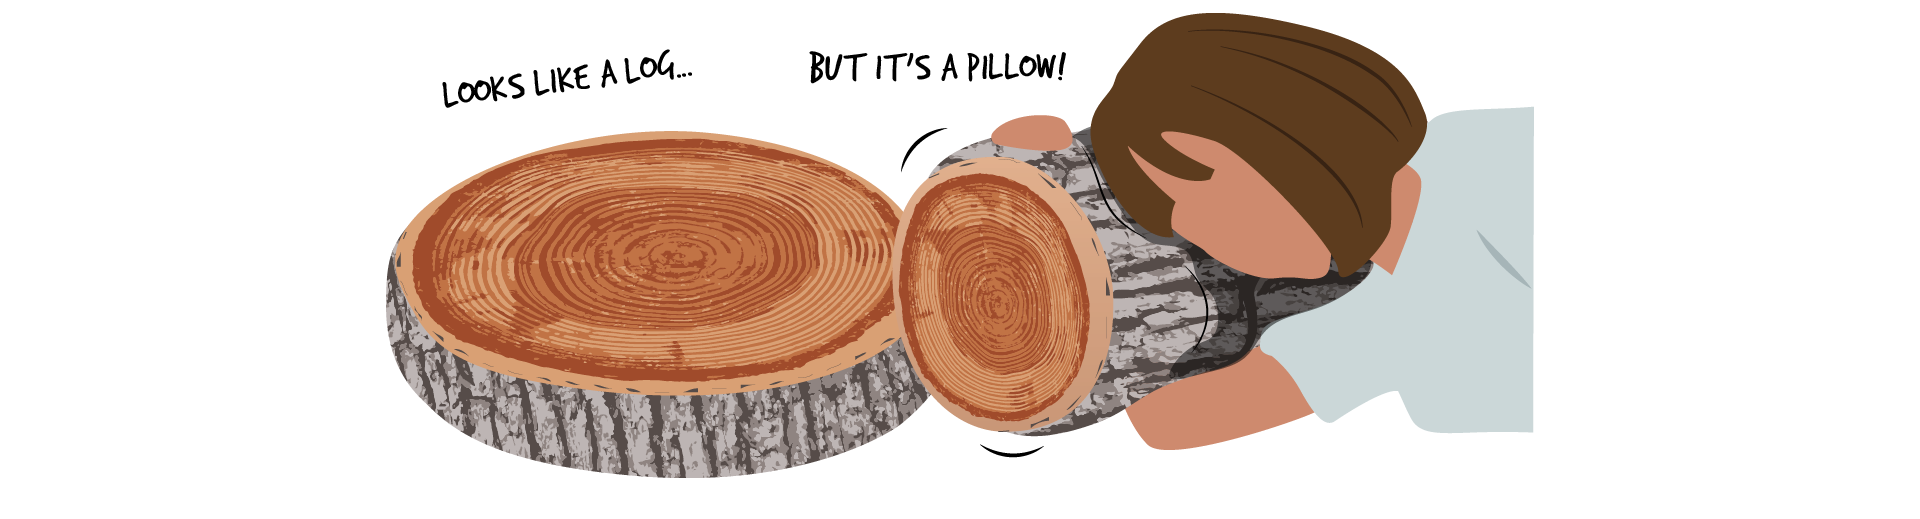 On the left is the top of a tree log. On the right, a person in grey shirt lies their head on the side of a cylindrical pillow in the shape of a log. The text reads: Looks like a log... but it's a pillow!